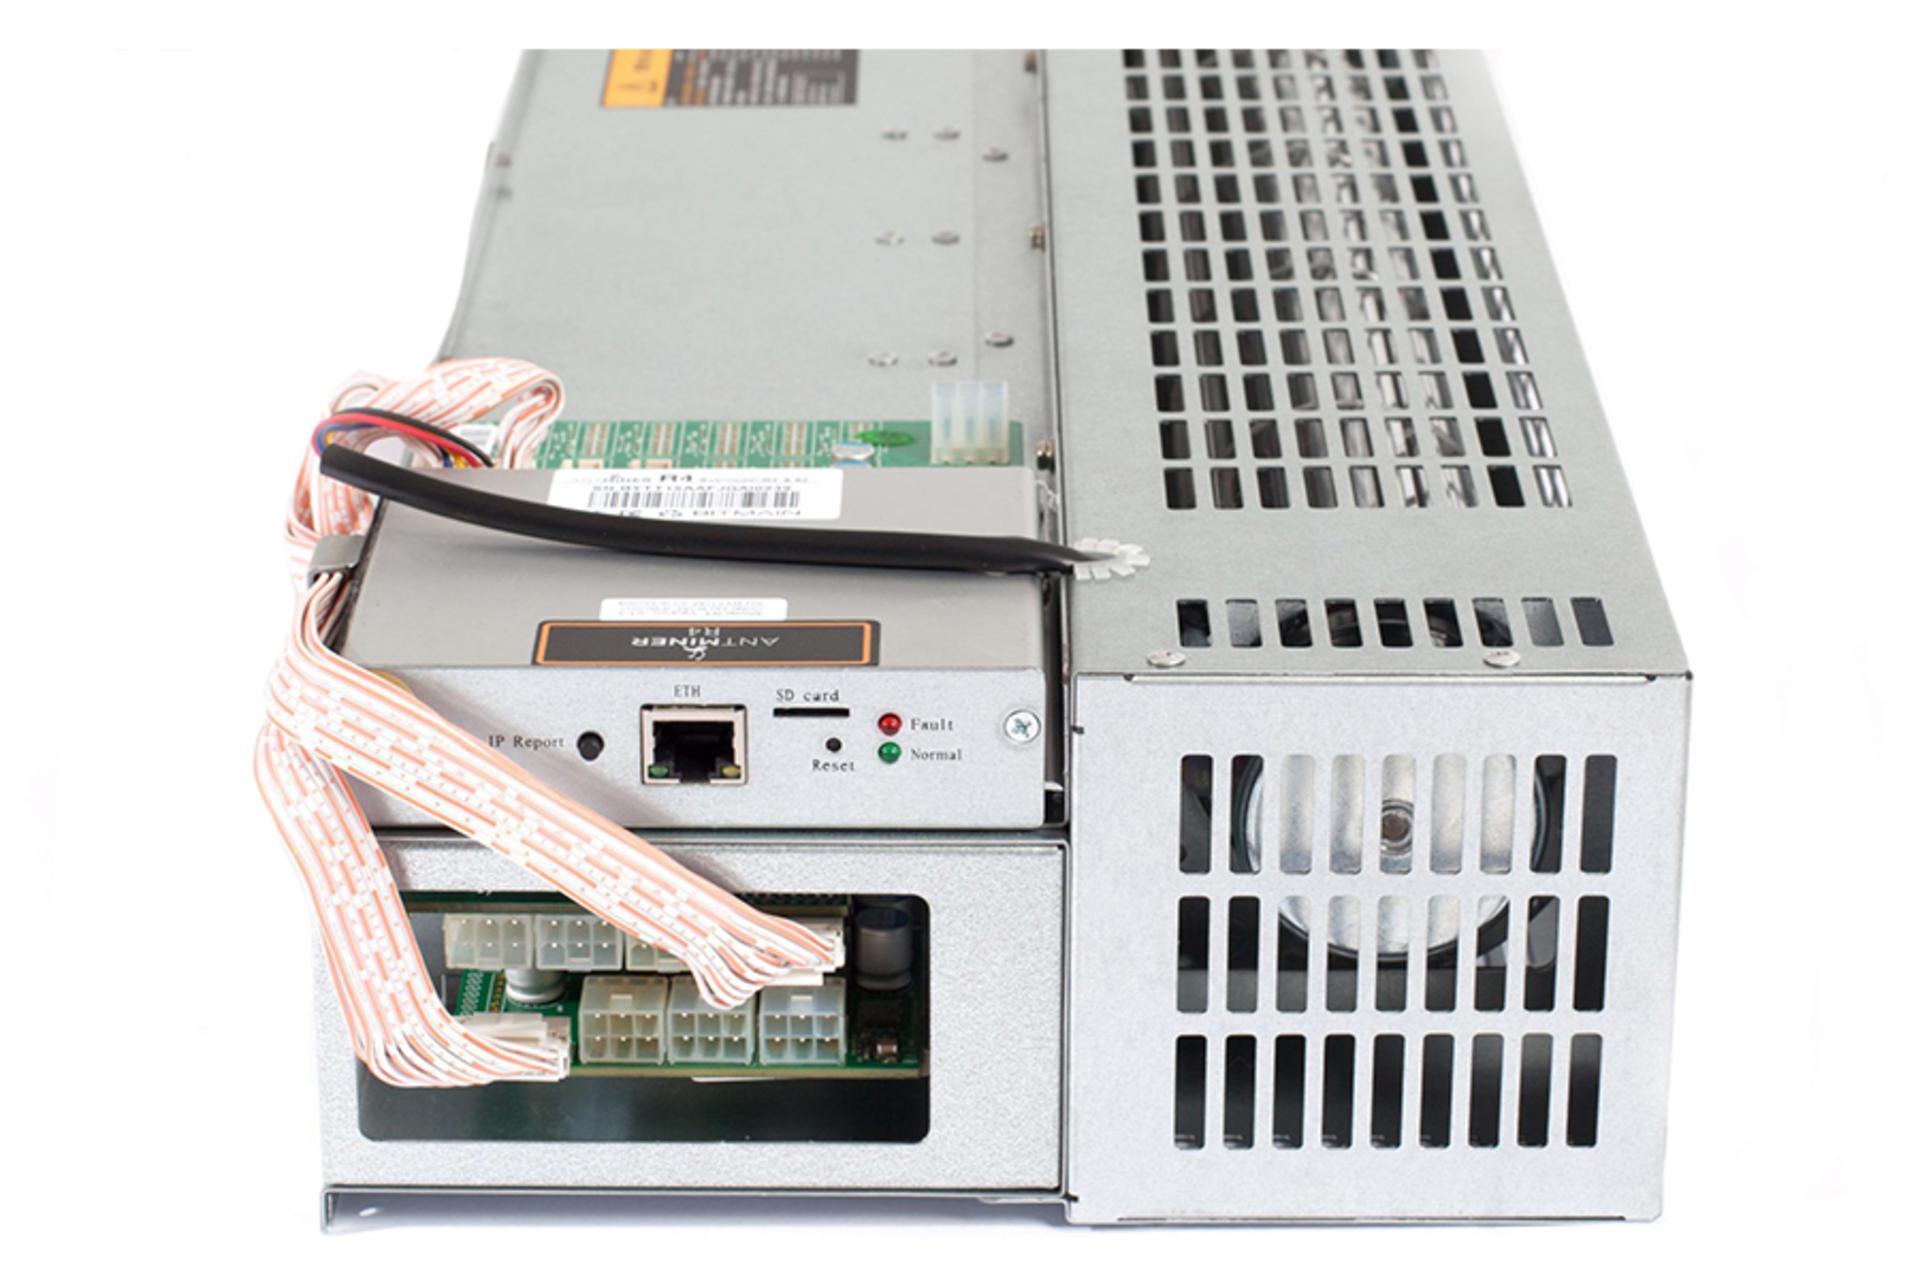 Bitmain Antminer R4 / ماینر Bitmain Antminer R4